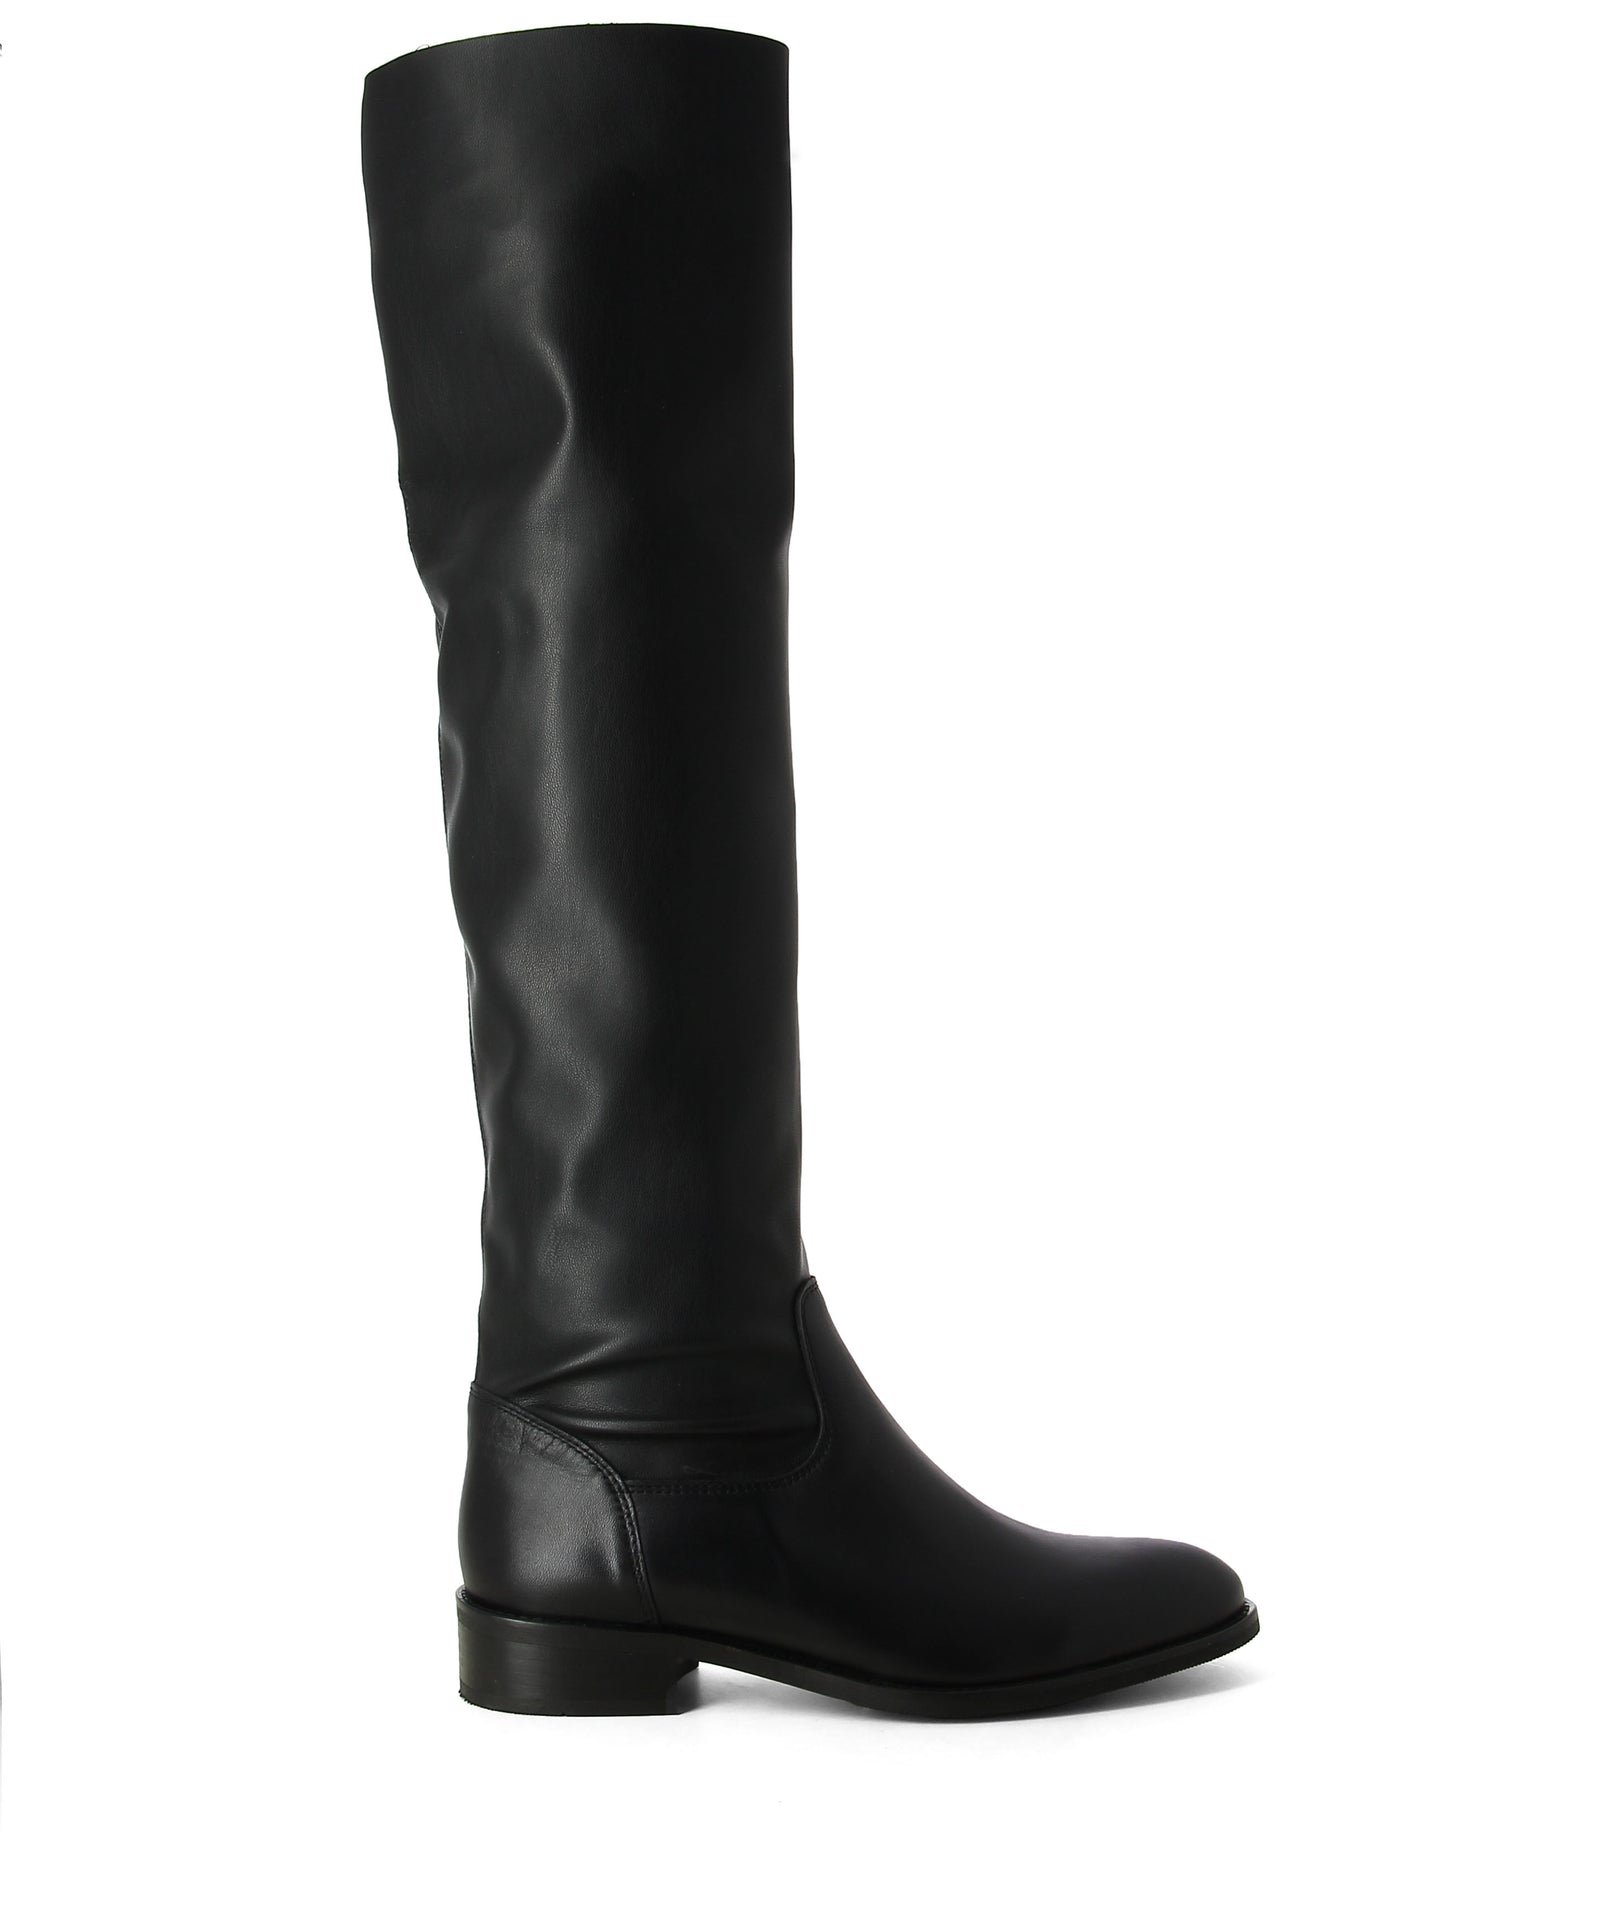 Women's Boots - Leather Boots - Heeled Boots - Flat Boots - ZOMP